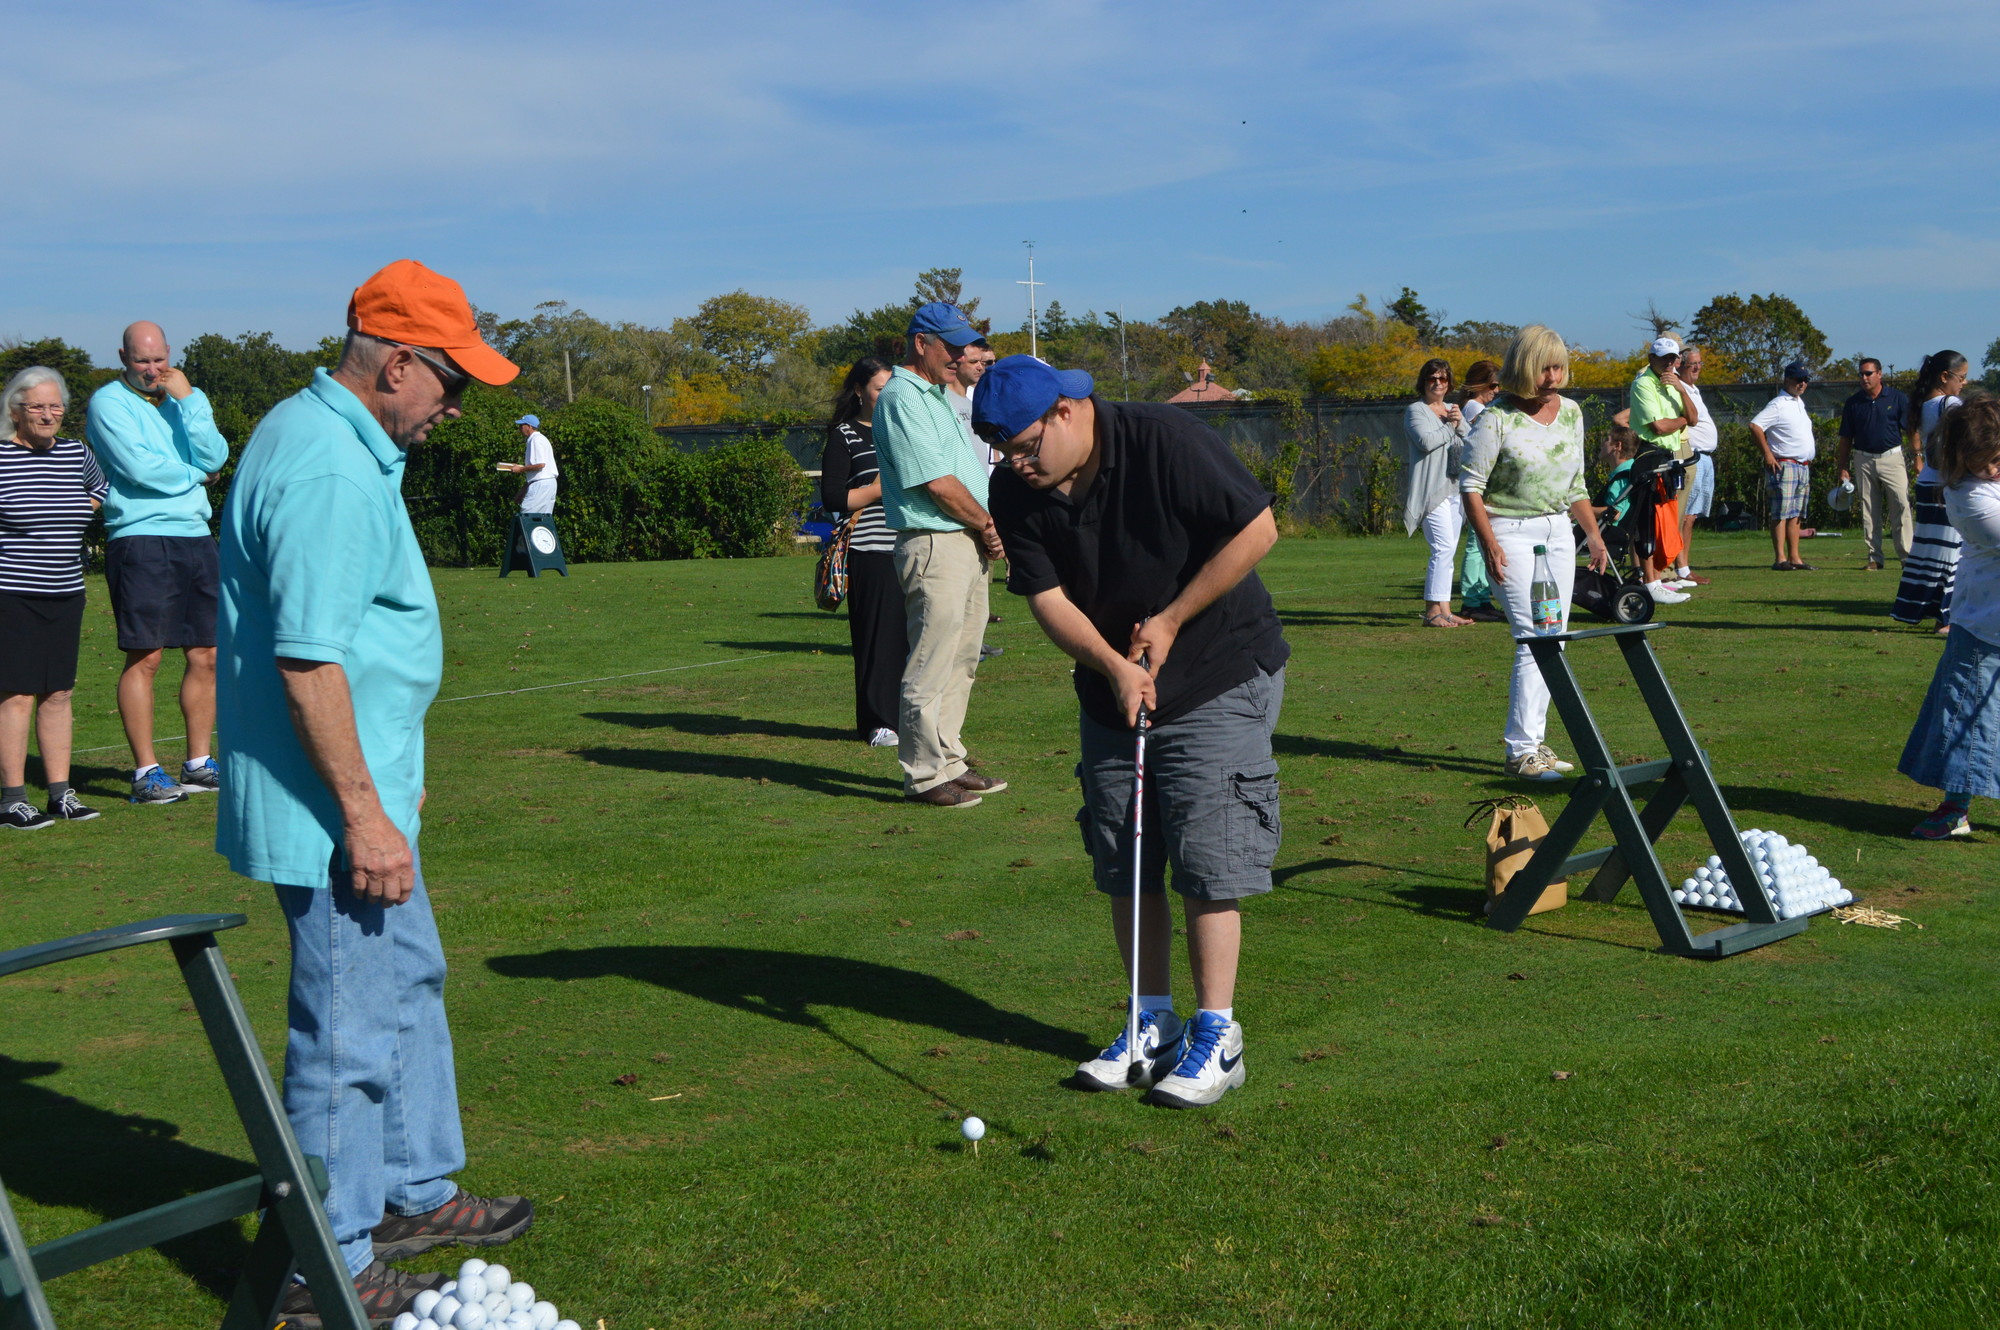 JCC’s “Play Golf” clinic provided the opportunity to learn how to play the game. Steve Hammerman, left, helped Adam Weingarten address the ball.